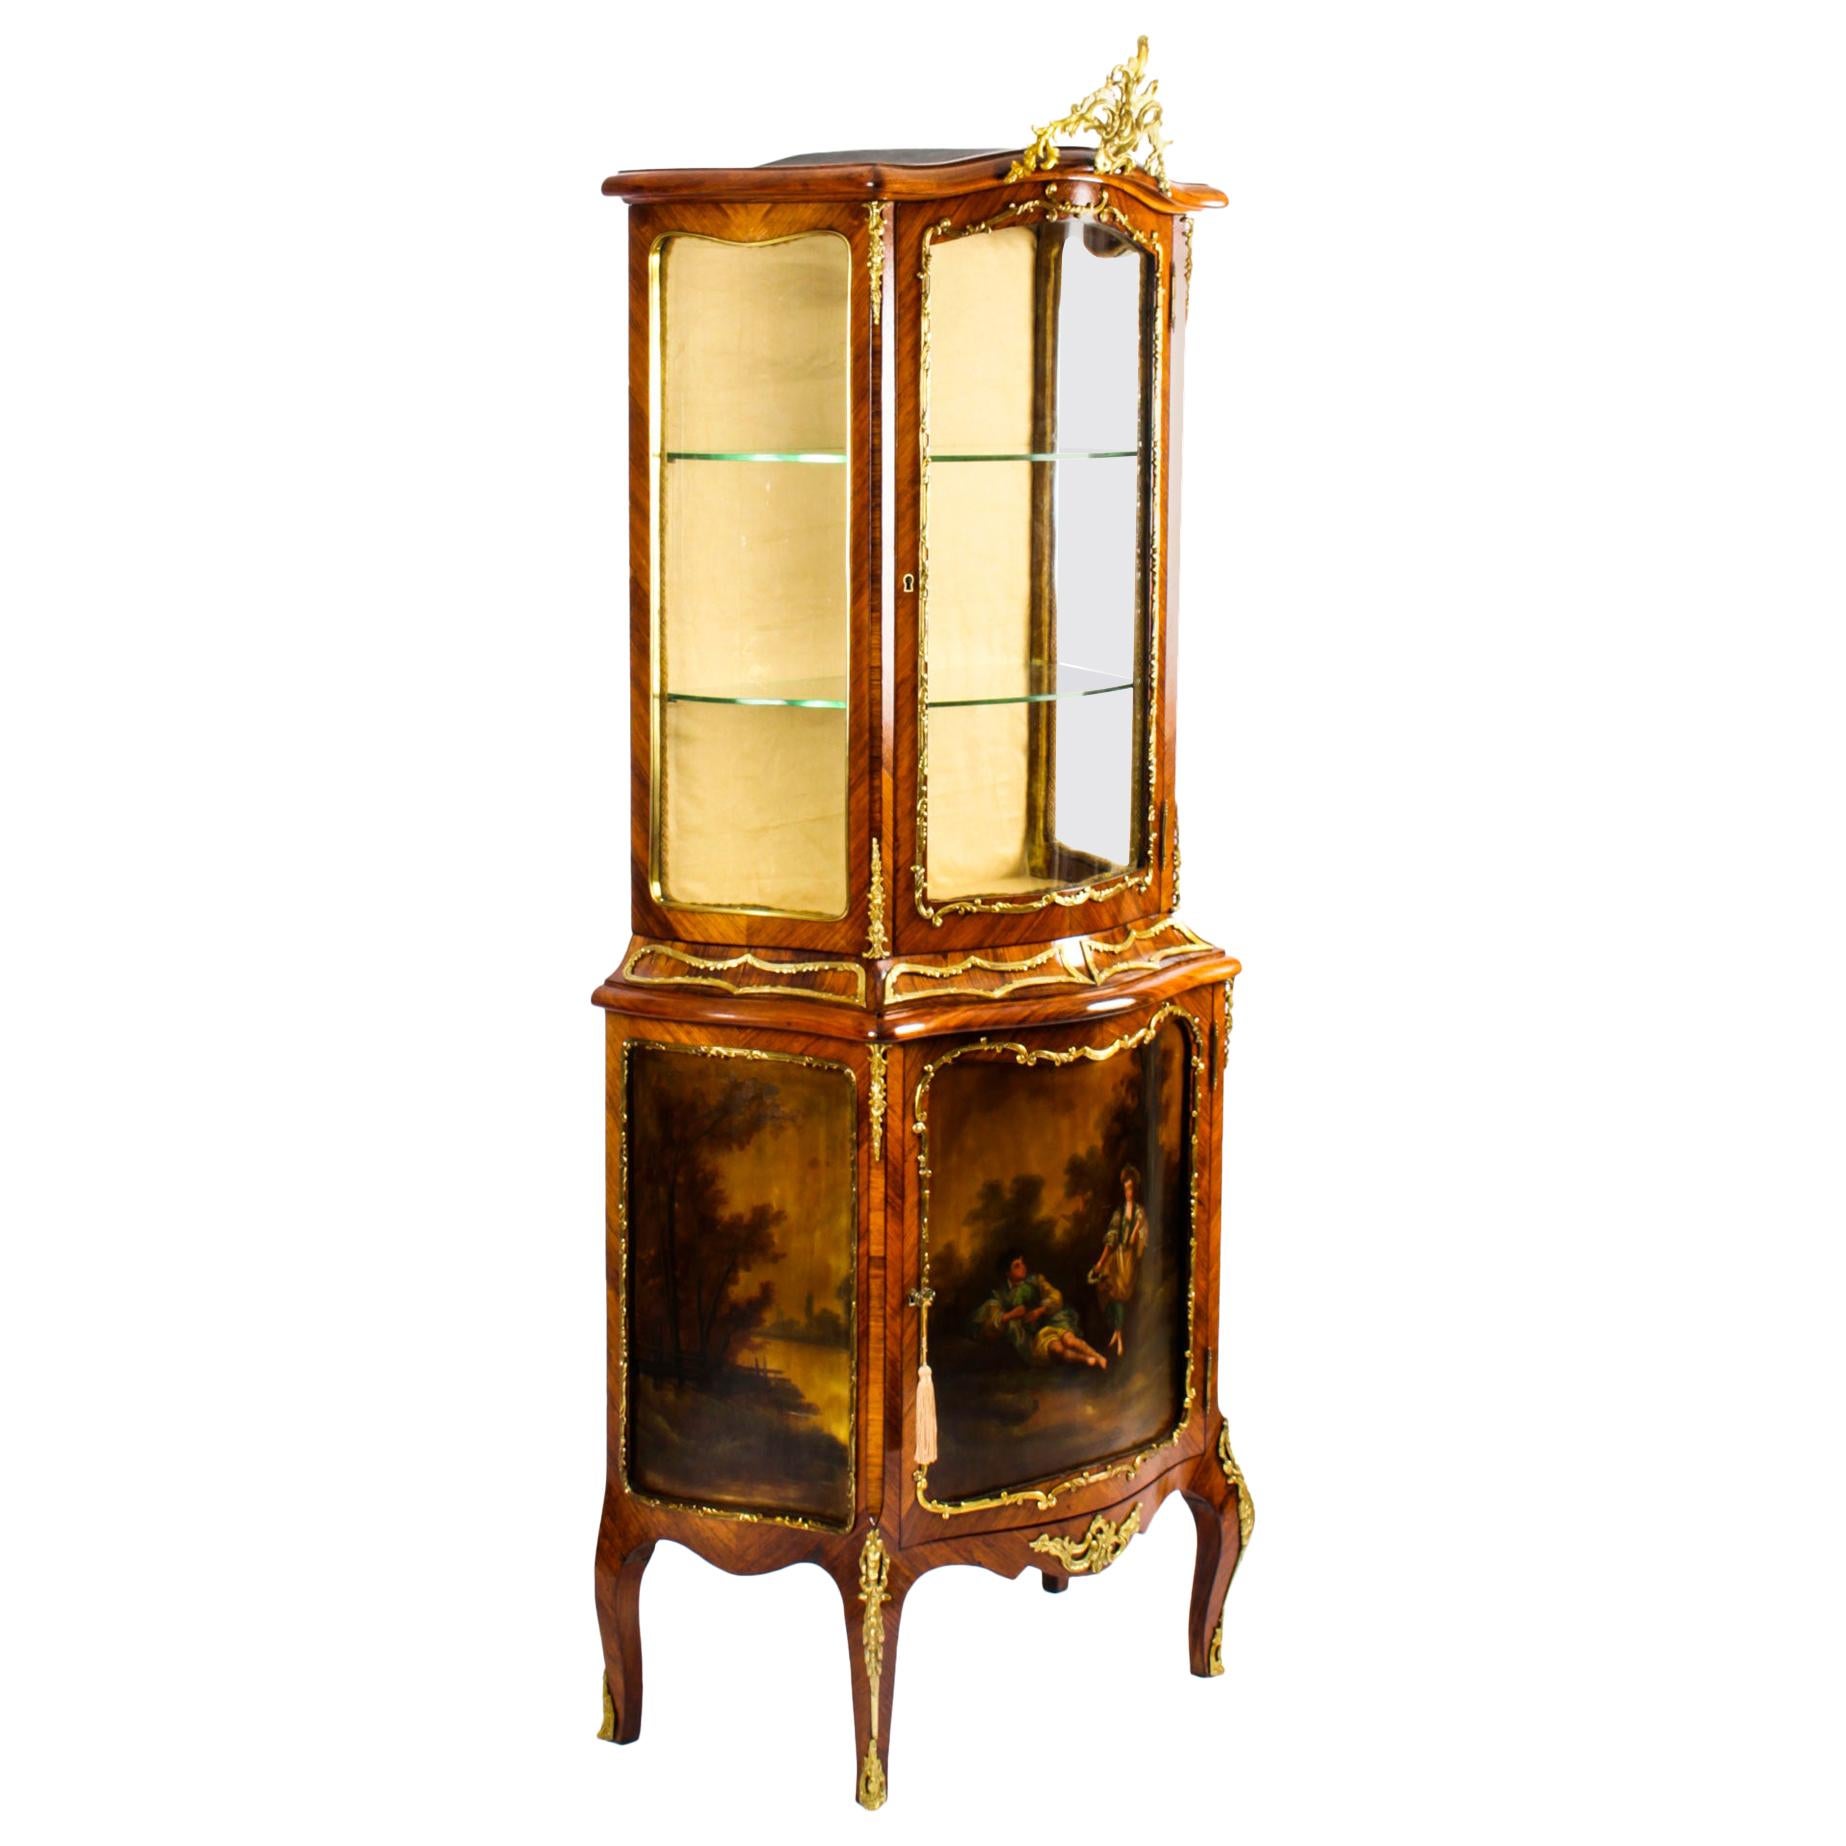 Antique French Transitional Vernis Martin Vitrine Display Cabinet, 19th Century